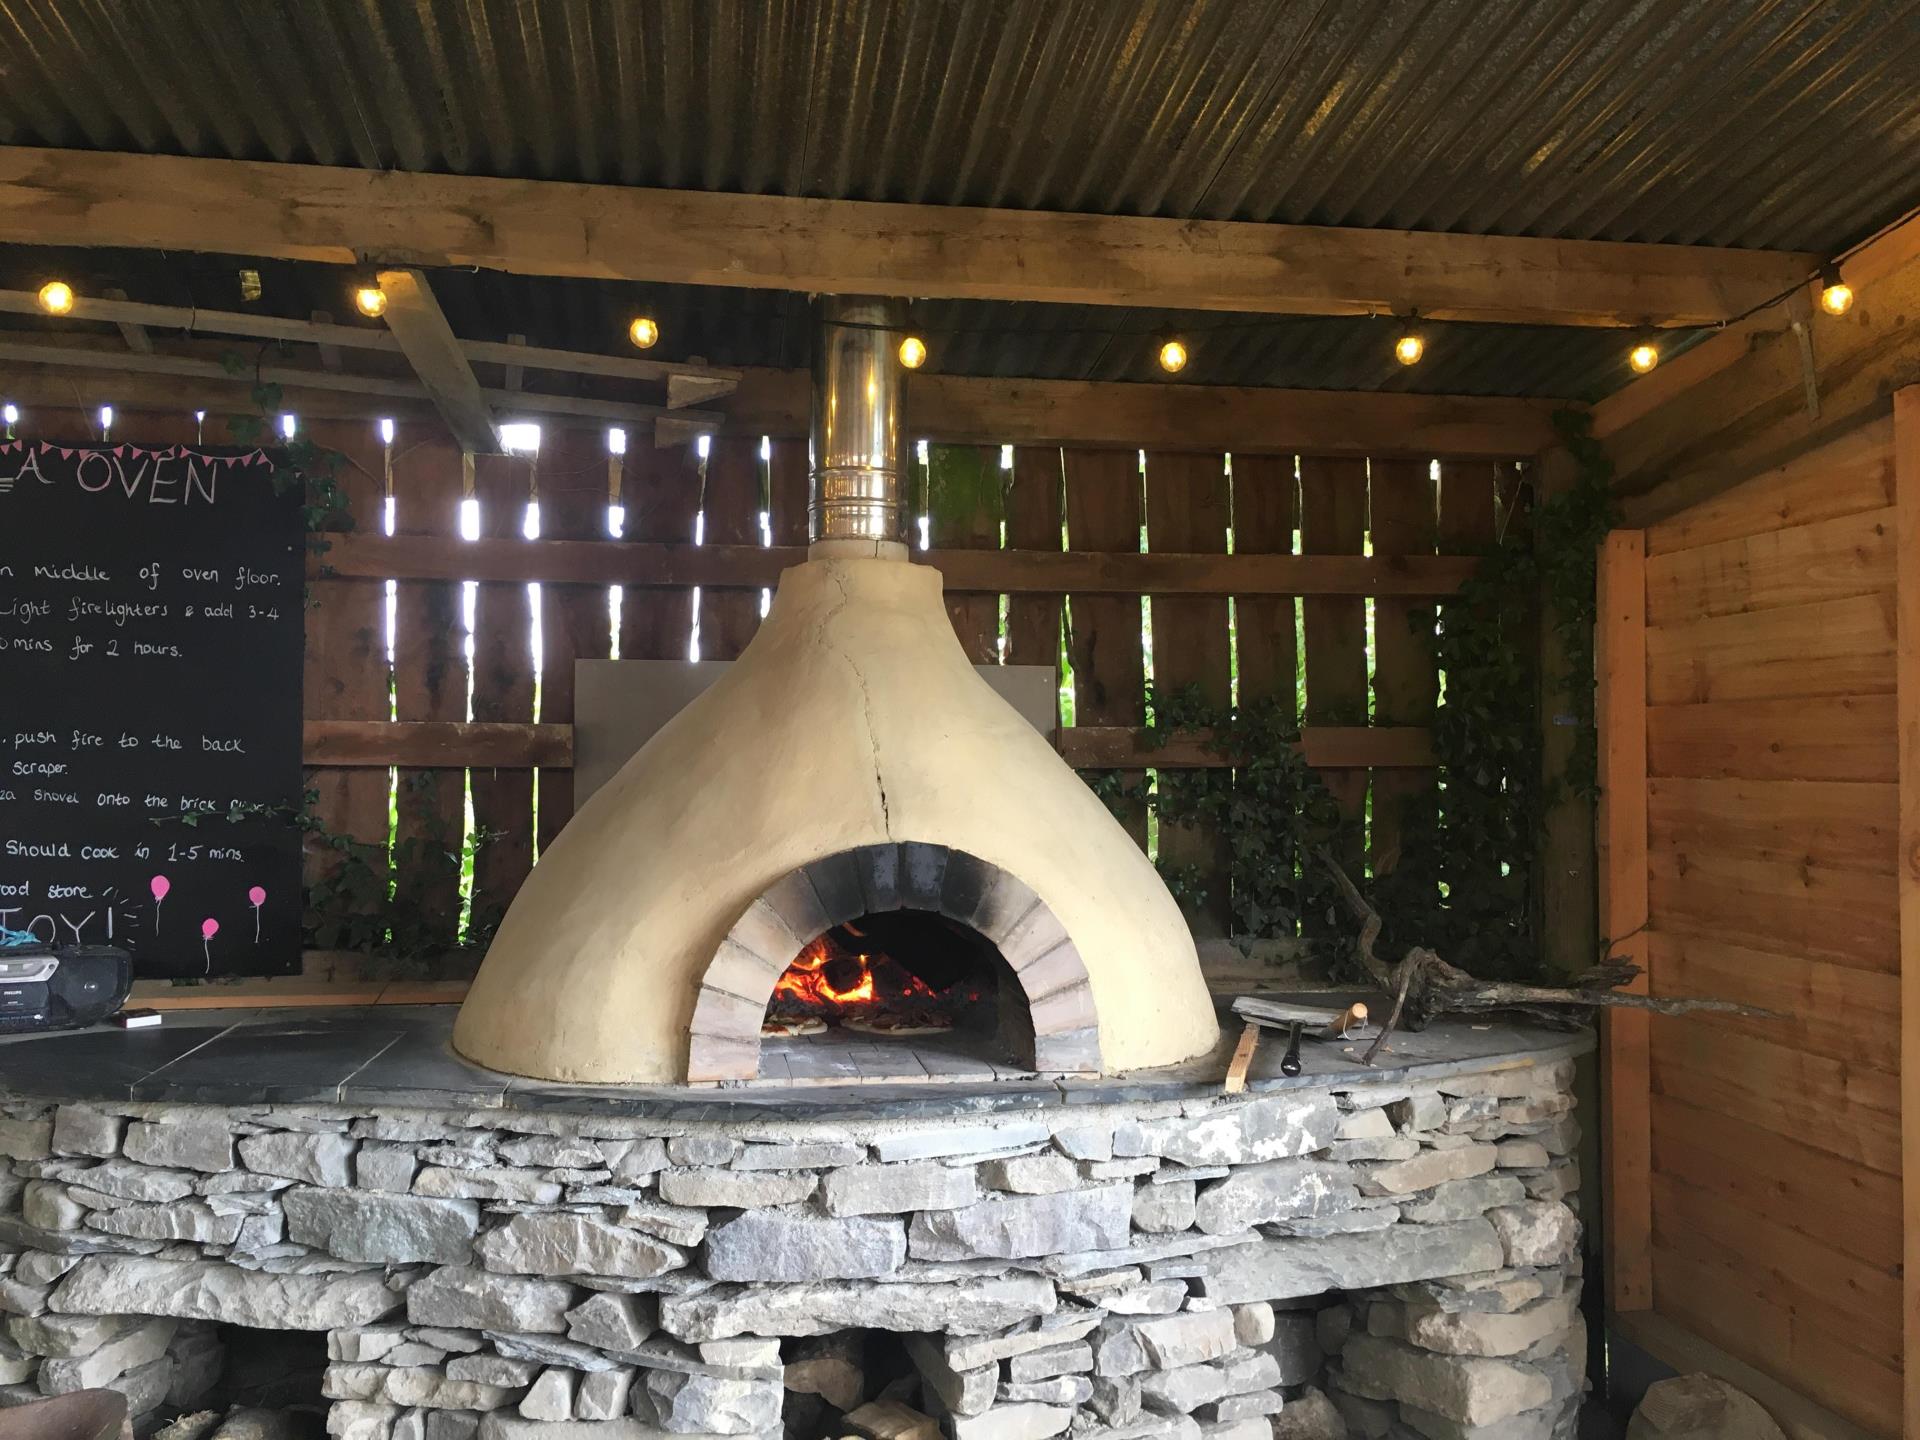 The wood fired pizza oven